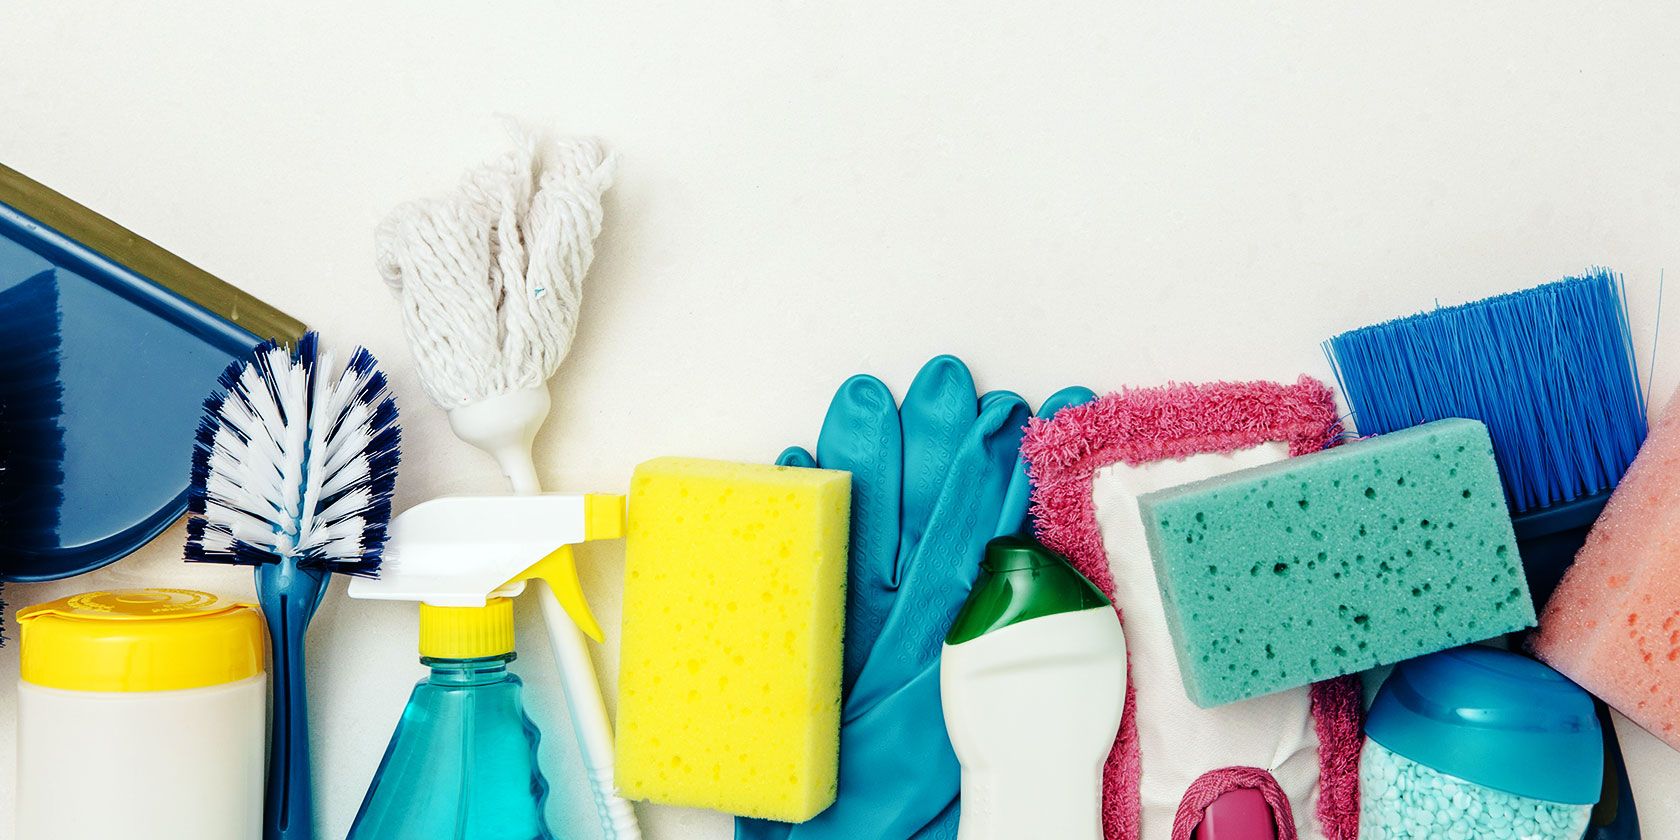 House cleaning and organizing